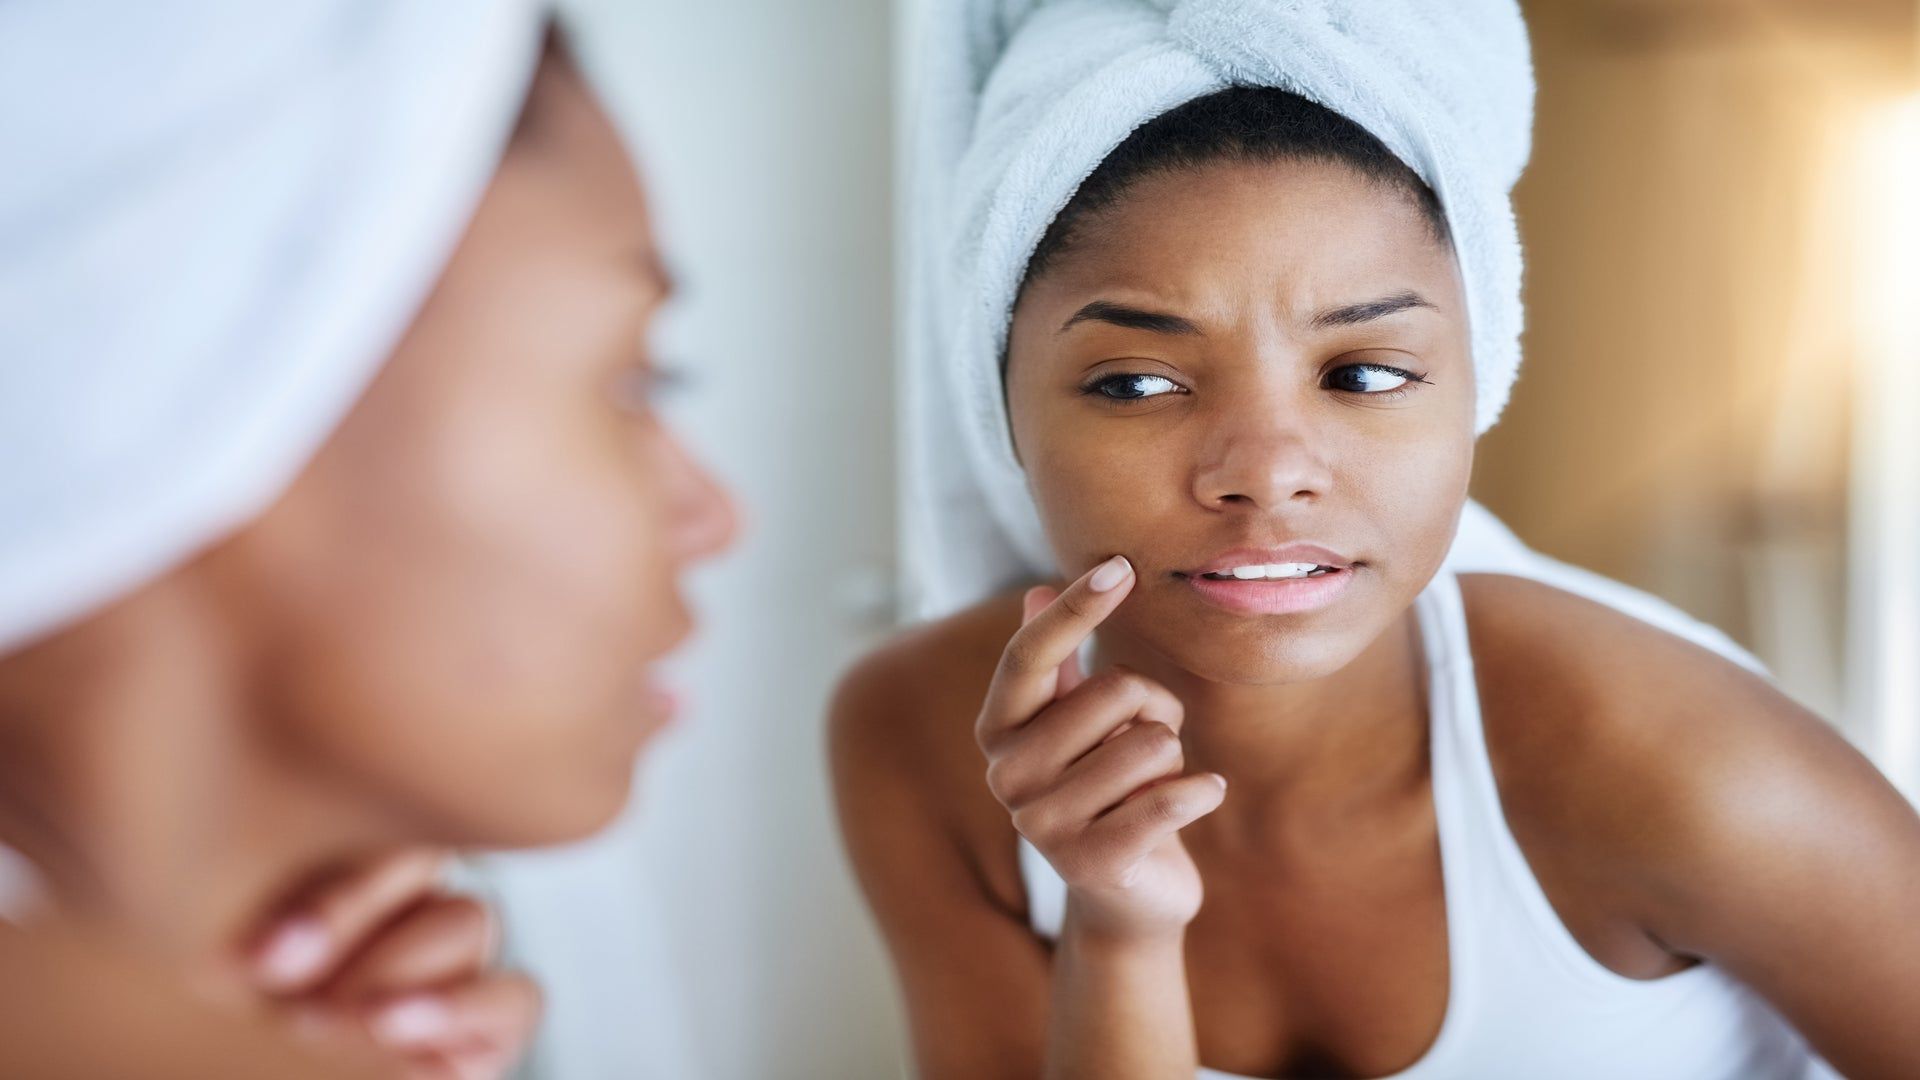 Cystic Acne Treatments For Darker Complexions